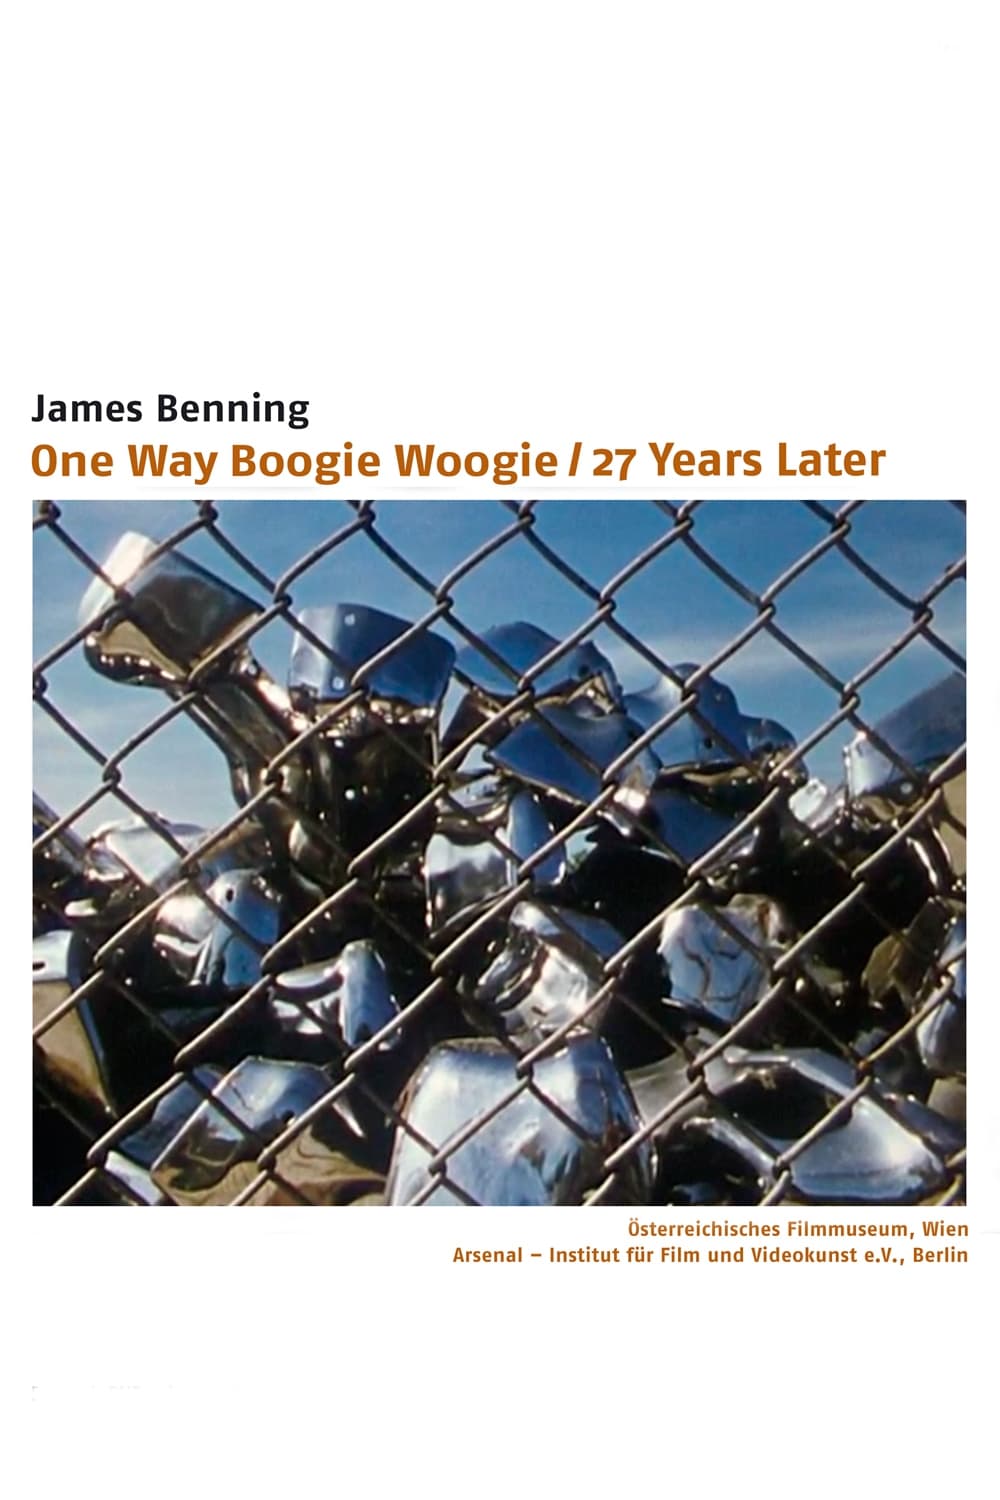 One Way Boogie Woogie/27 Years Later